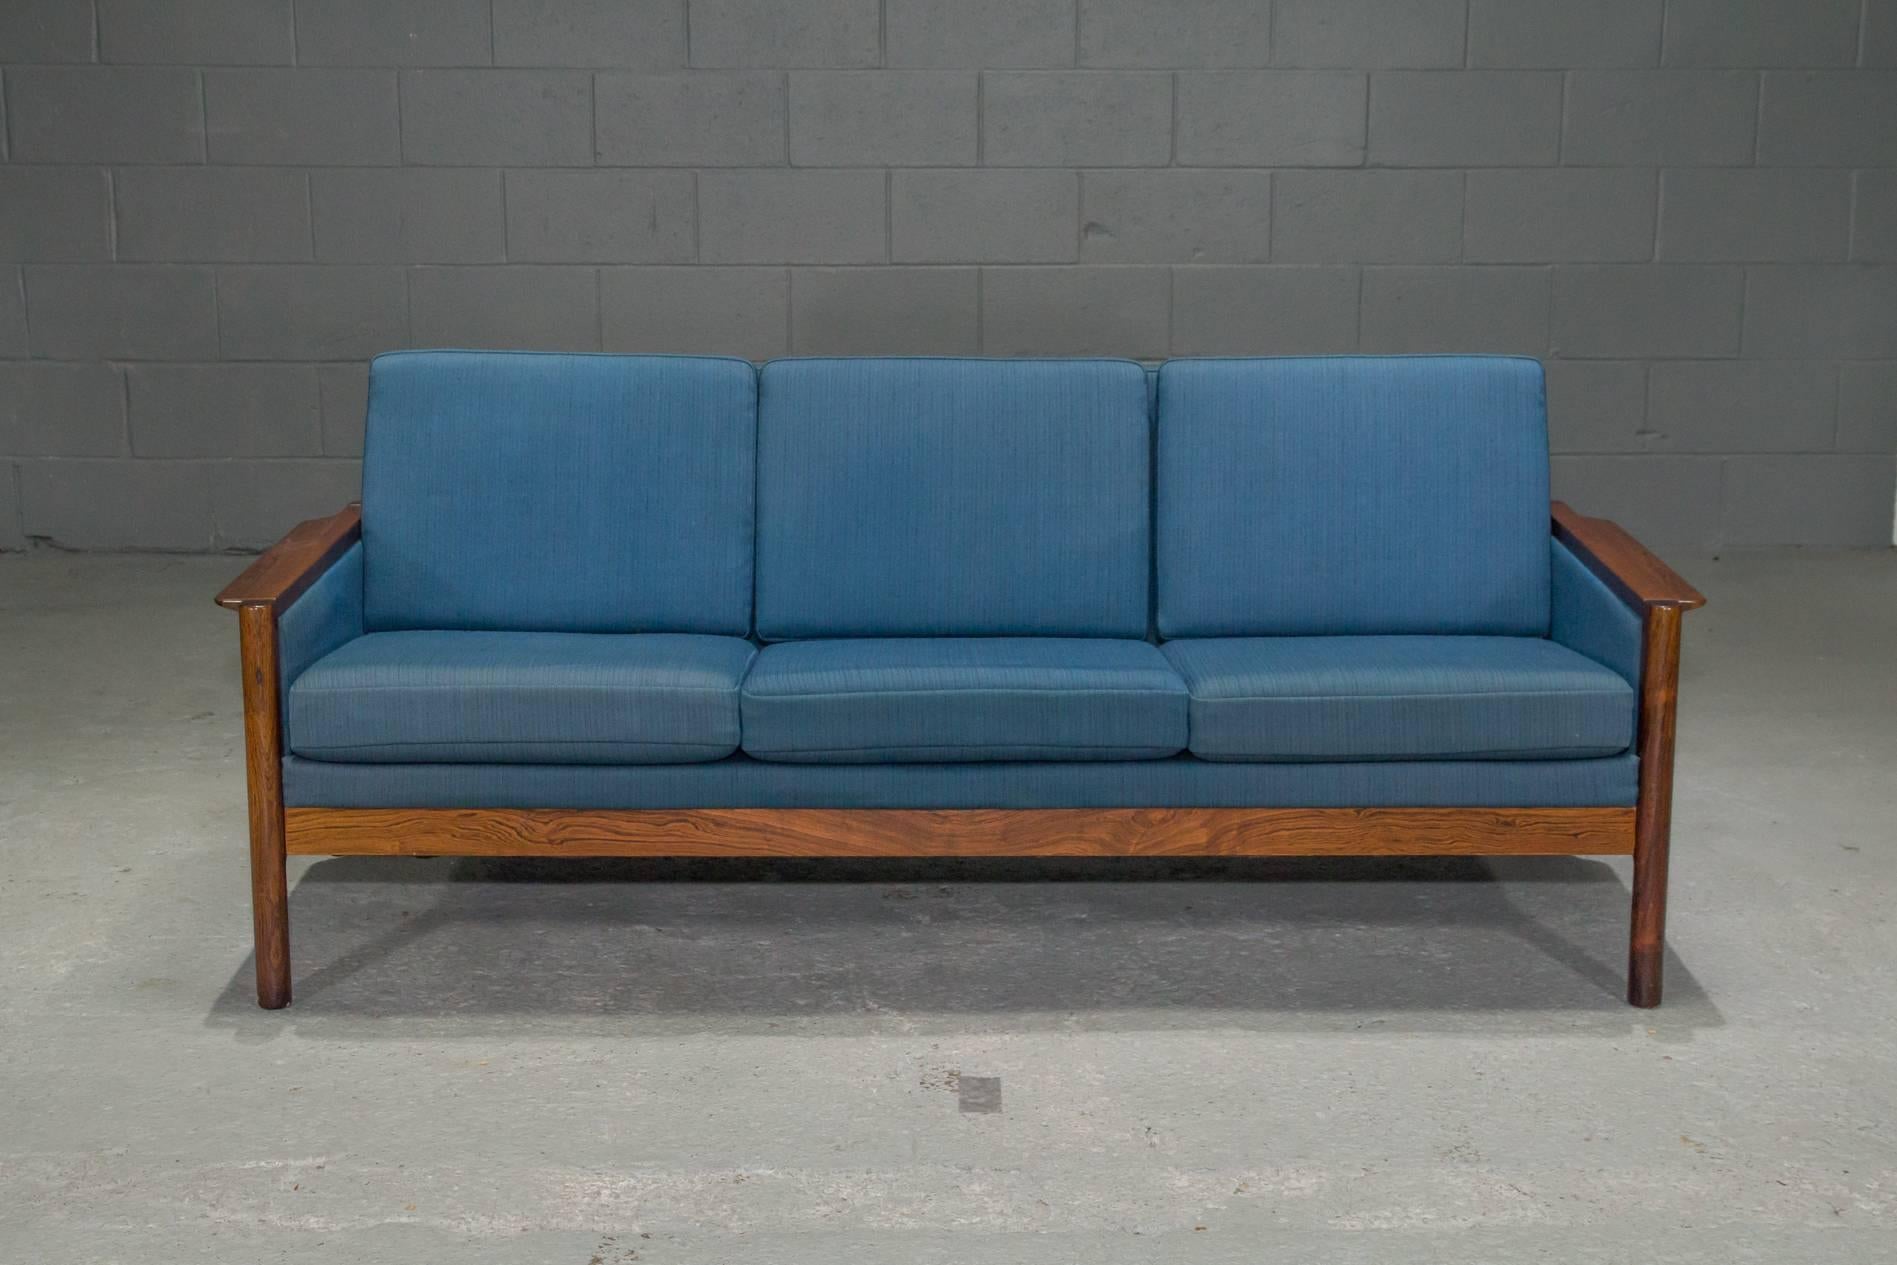 Three-Seat Danish Modern Rosewood Sofa with Blue Textile. 1960s. Beautiful solid rosewood frame. Matching armchair and settee also available.